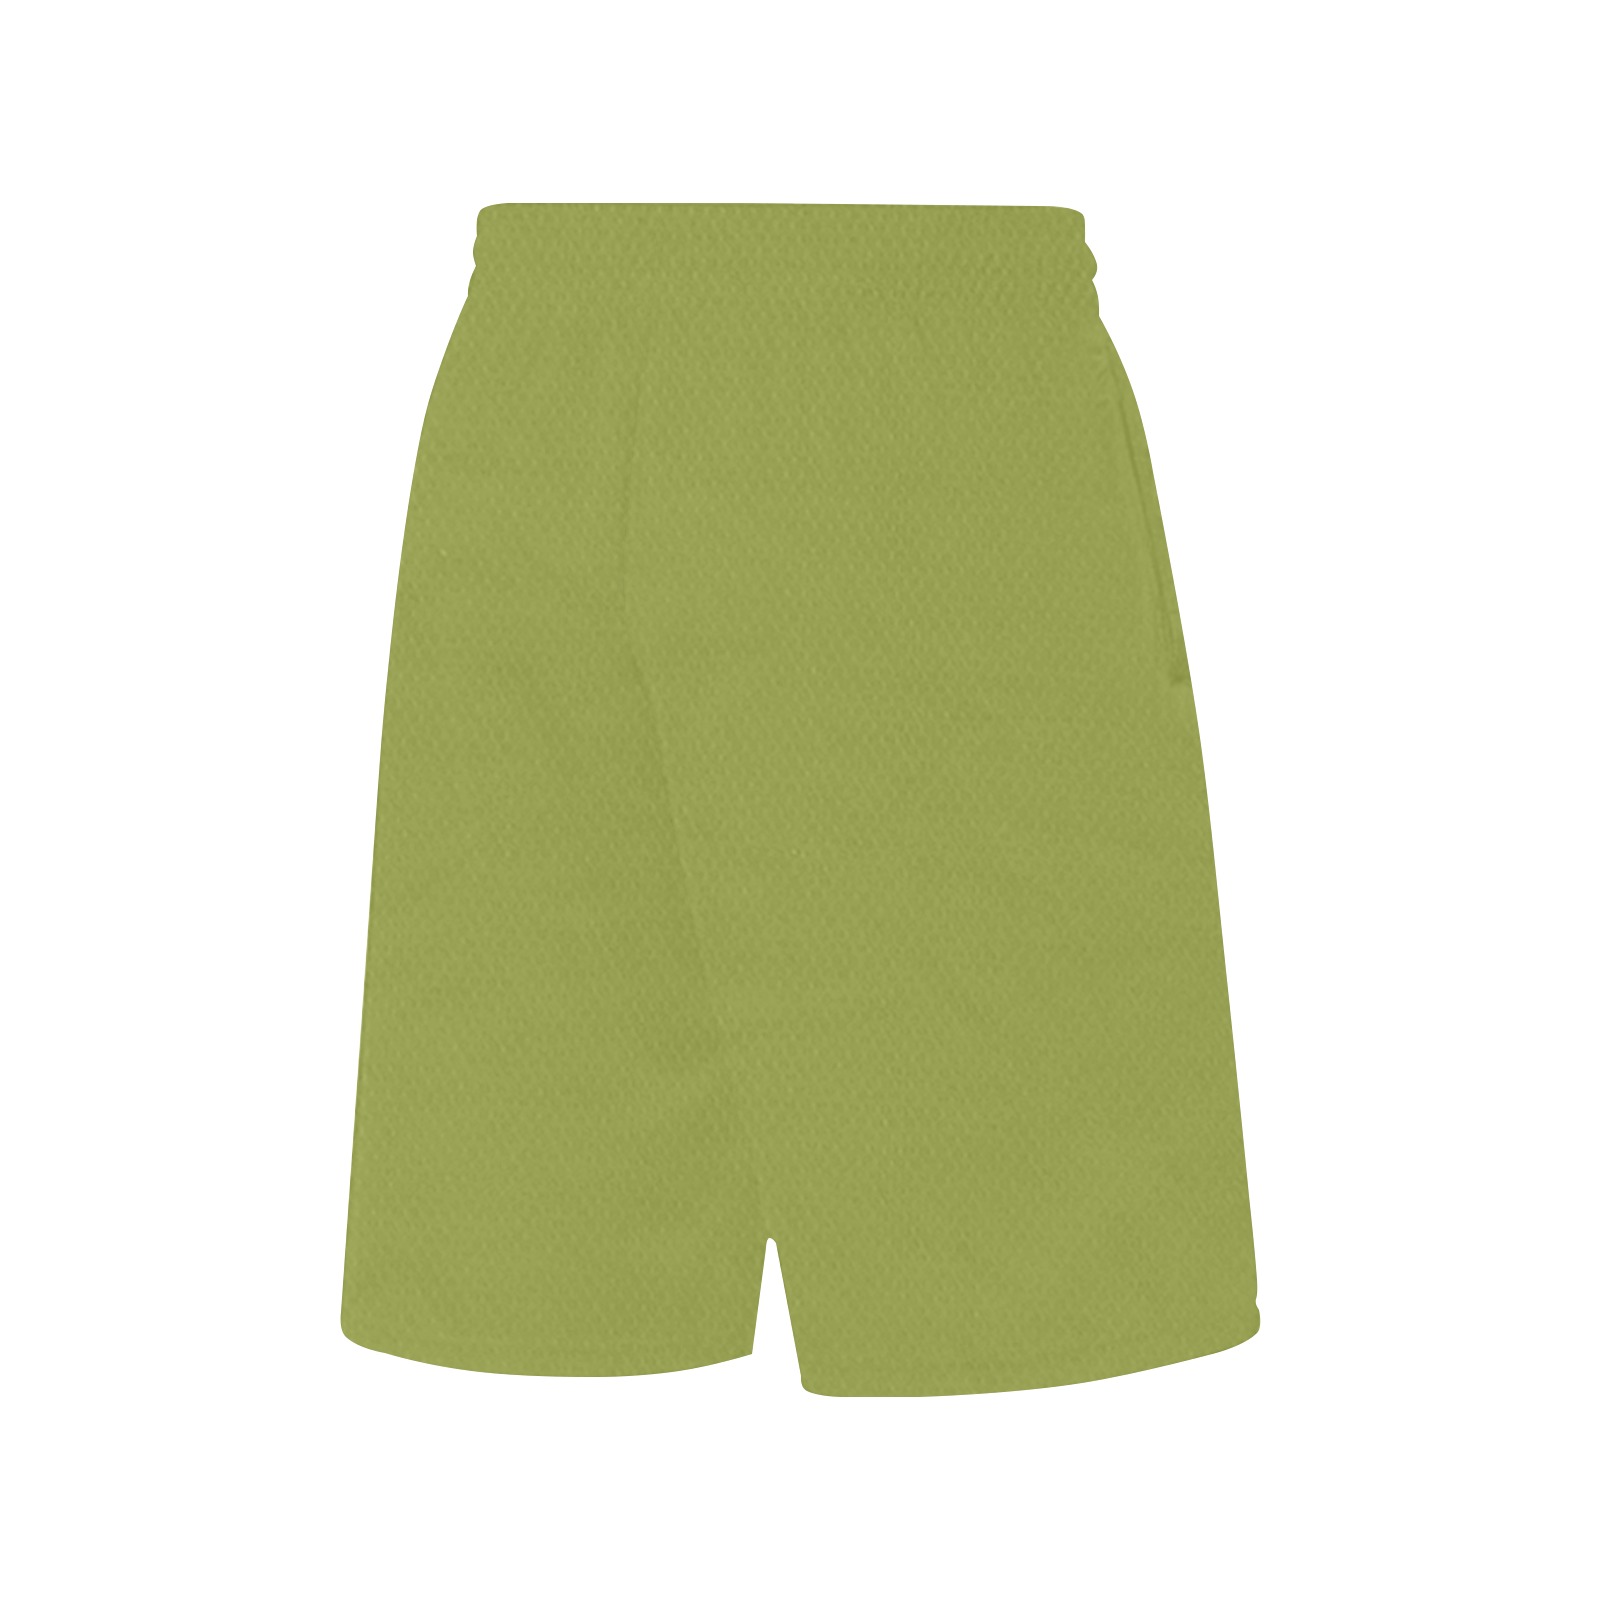 green All Over Print Basketball Shorts with Pocket